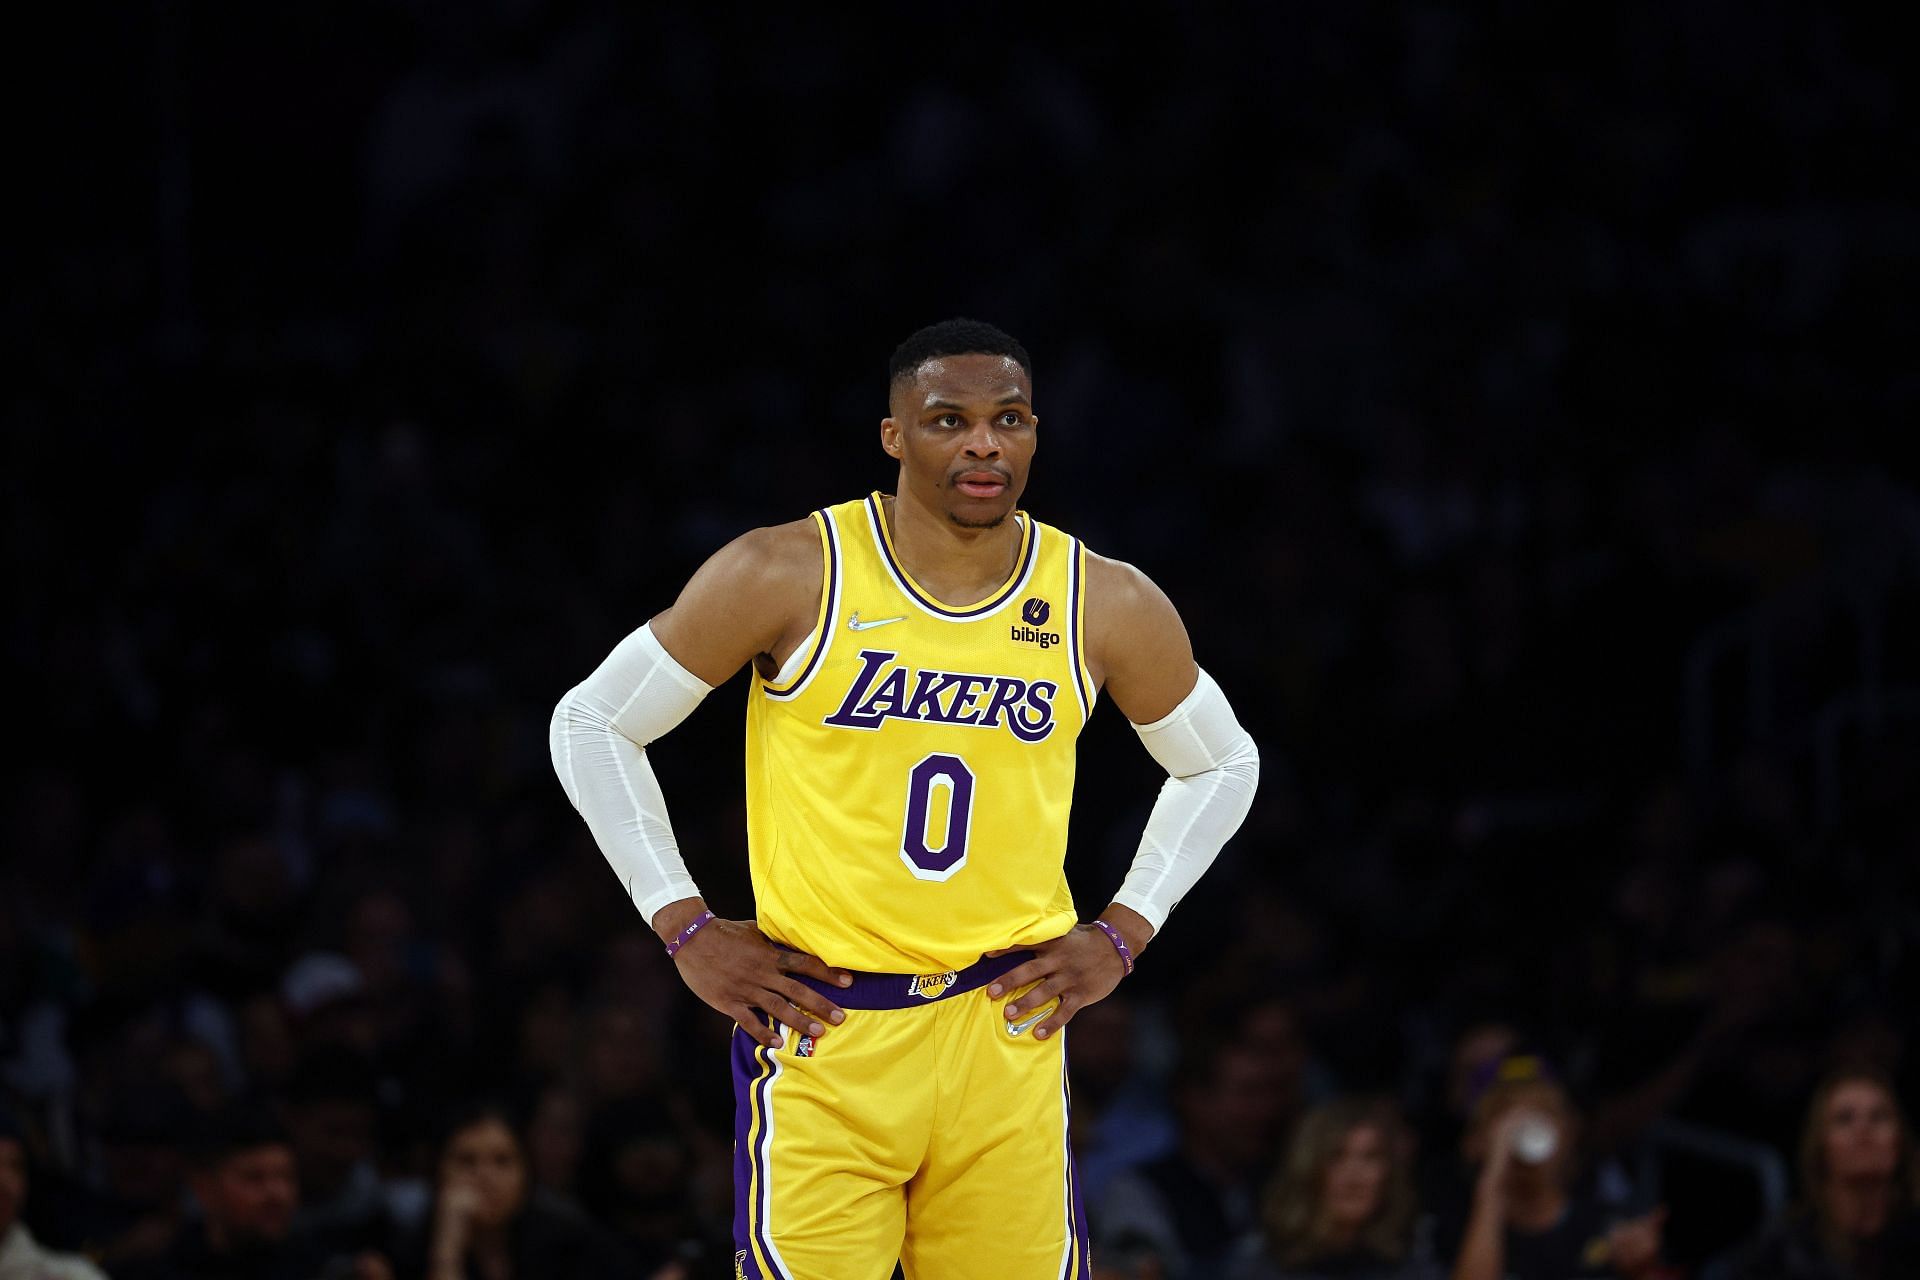 Russell Westbrook will be soon hoping to play at his best for the Los Angeles Lakers